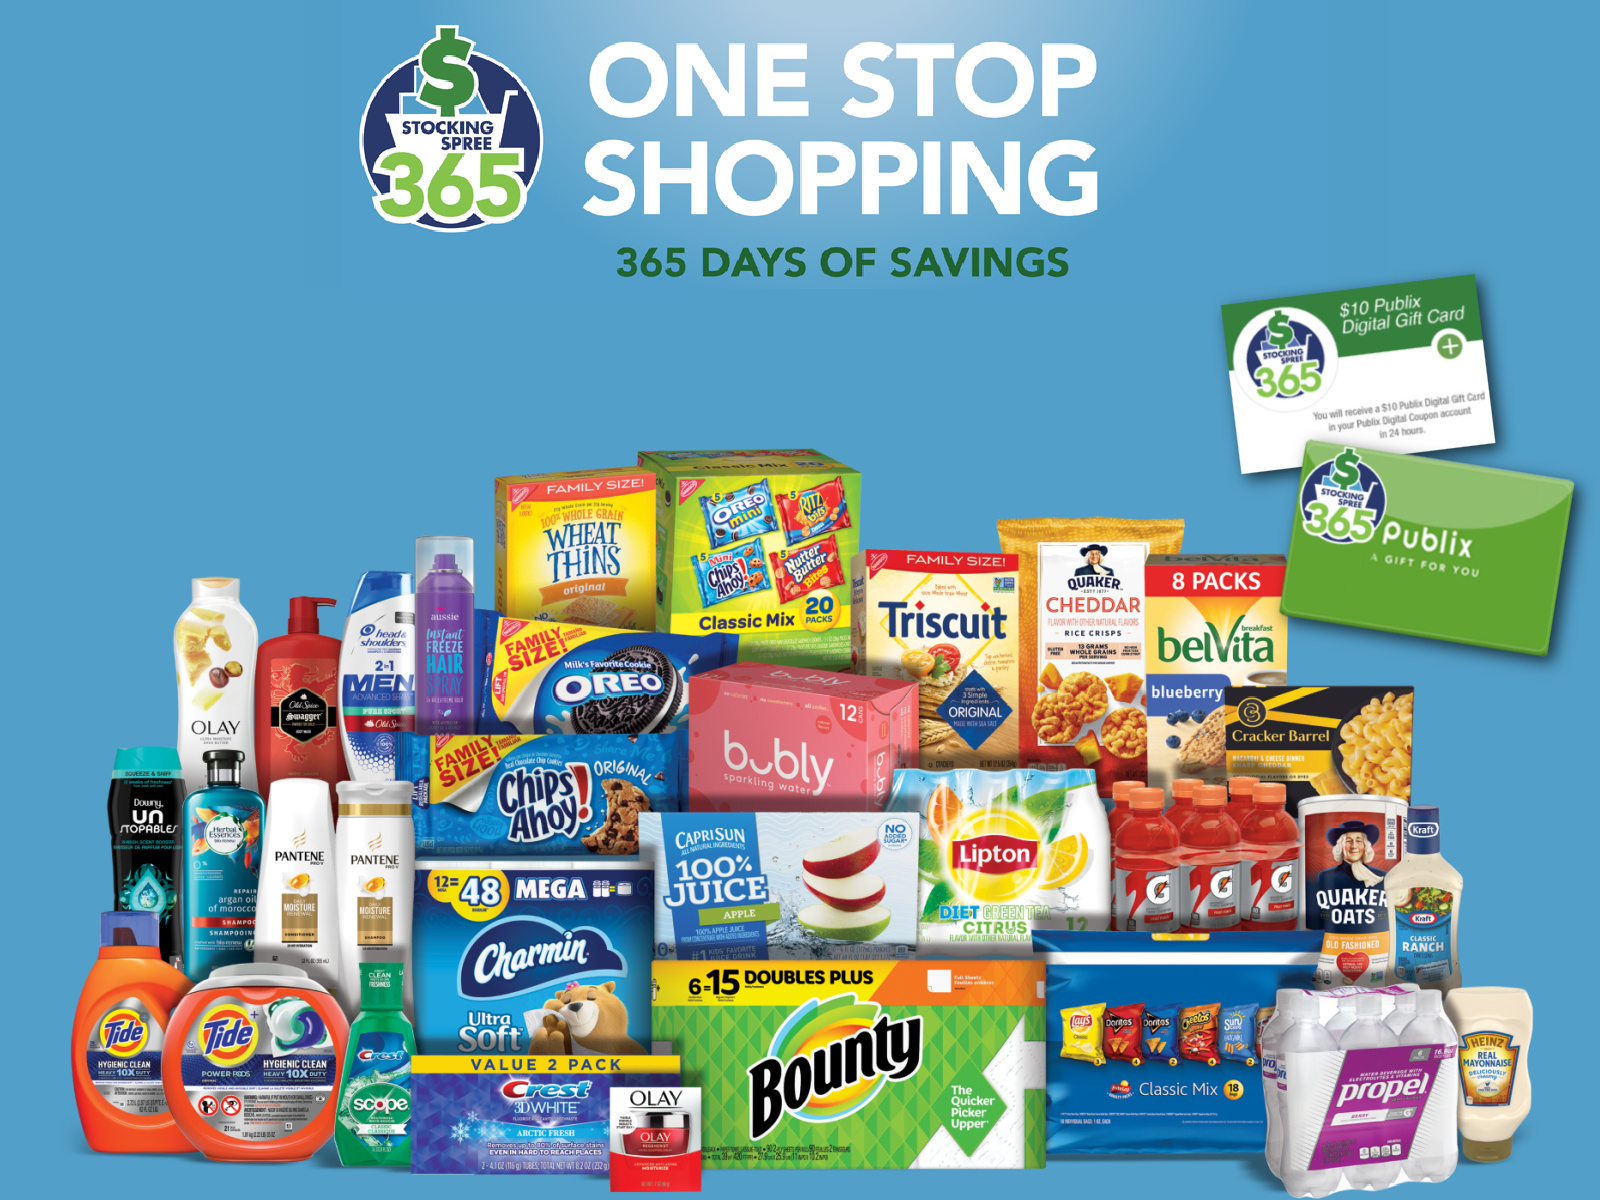 The Stocking Spree 365 Program Is Back For 2022 – Start Earning Up To $120 In Publix Gift Cards